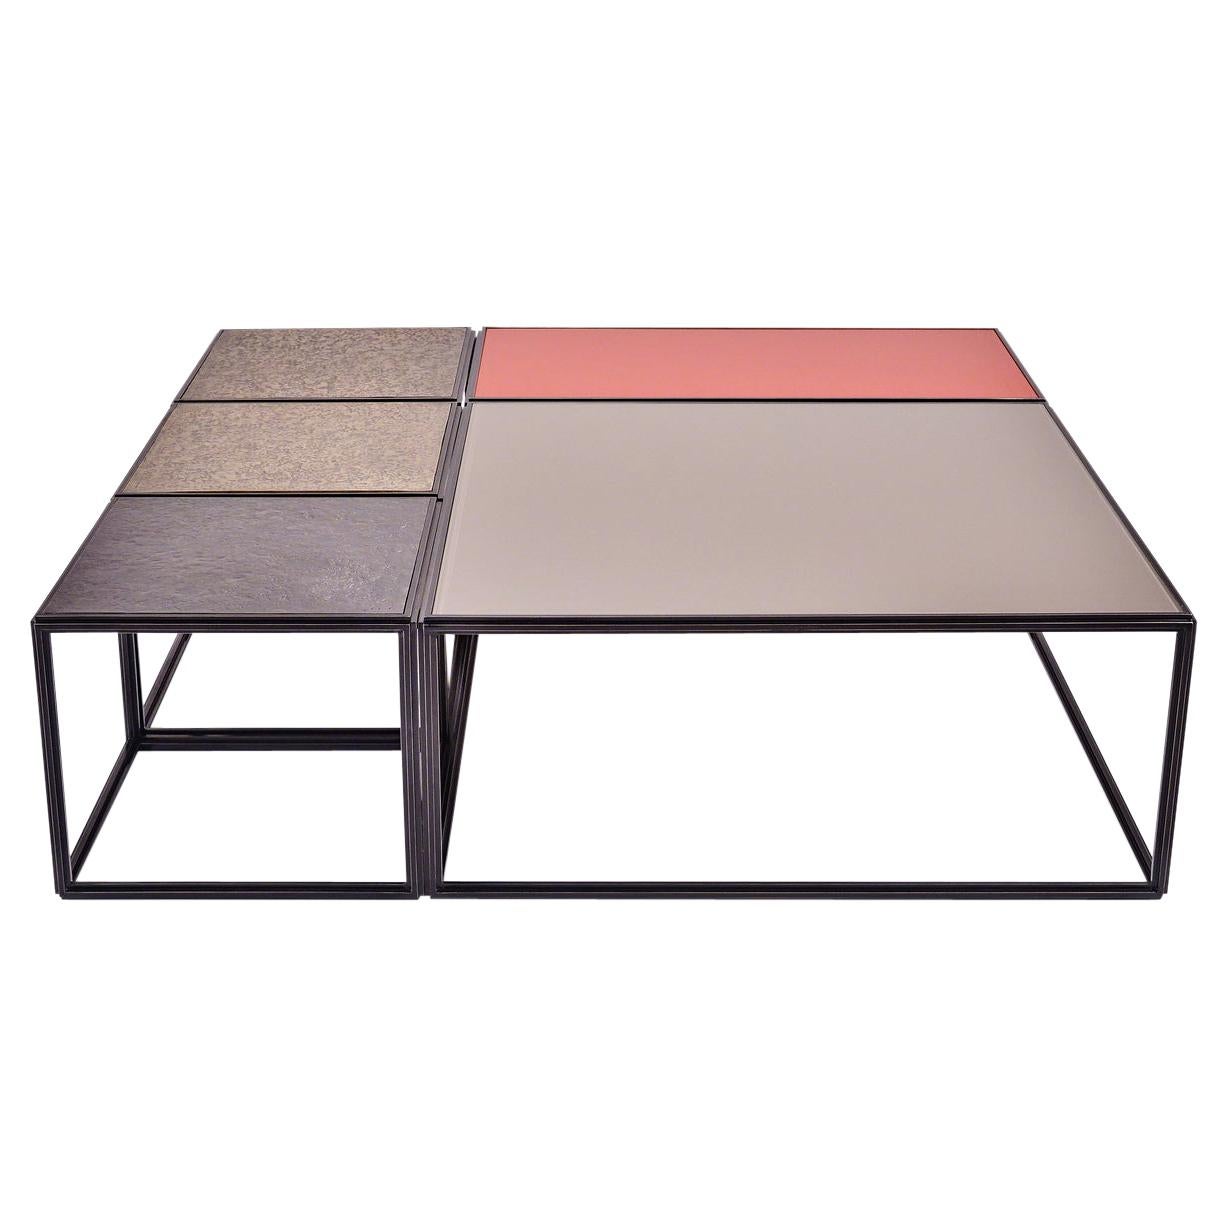 Modular "Mondrian" Brass, Bronze and Glass Low Table, by P. Tendercool